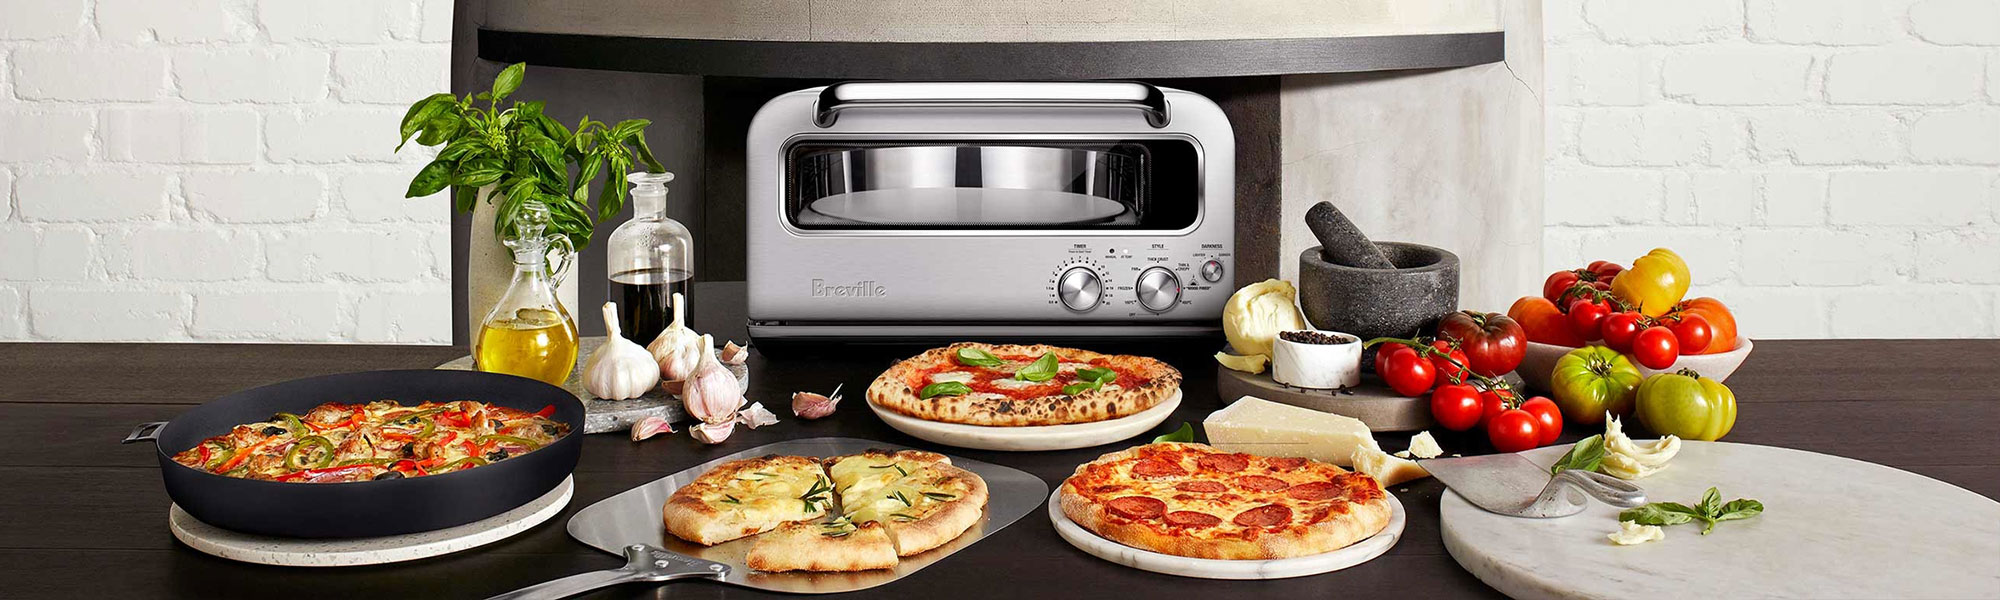 the Smart Oven Pizzaiolo Pizza maker in Brushed Stainless Steel